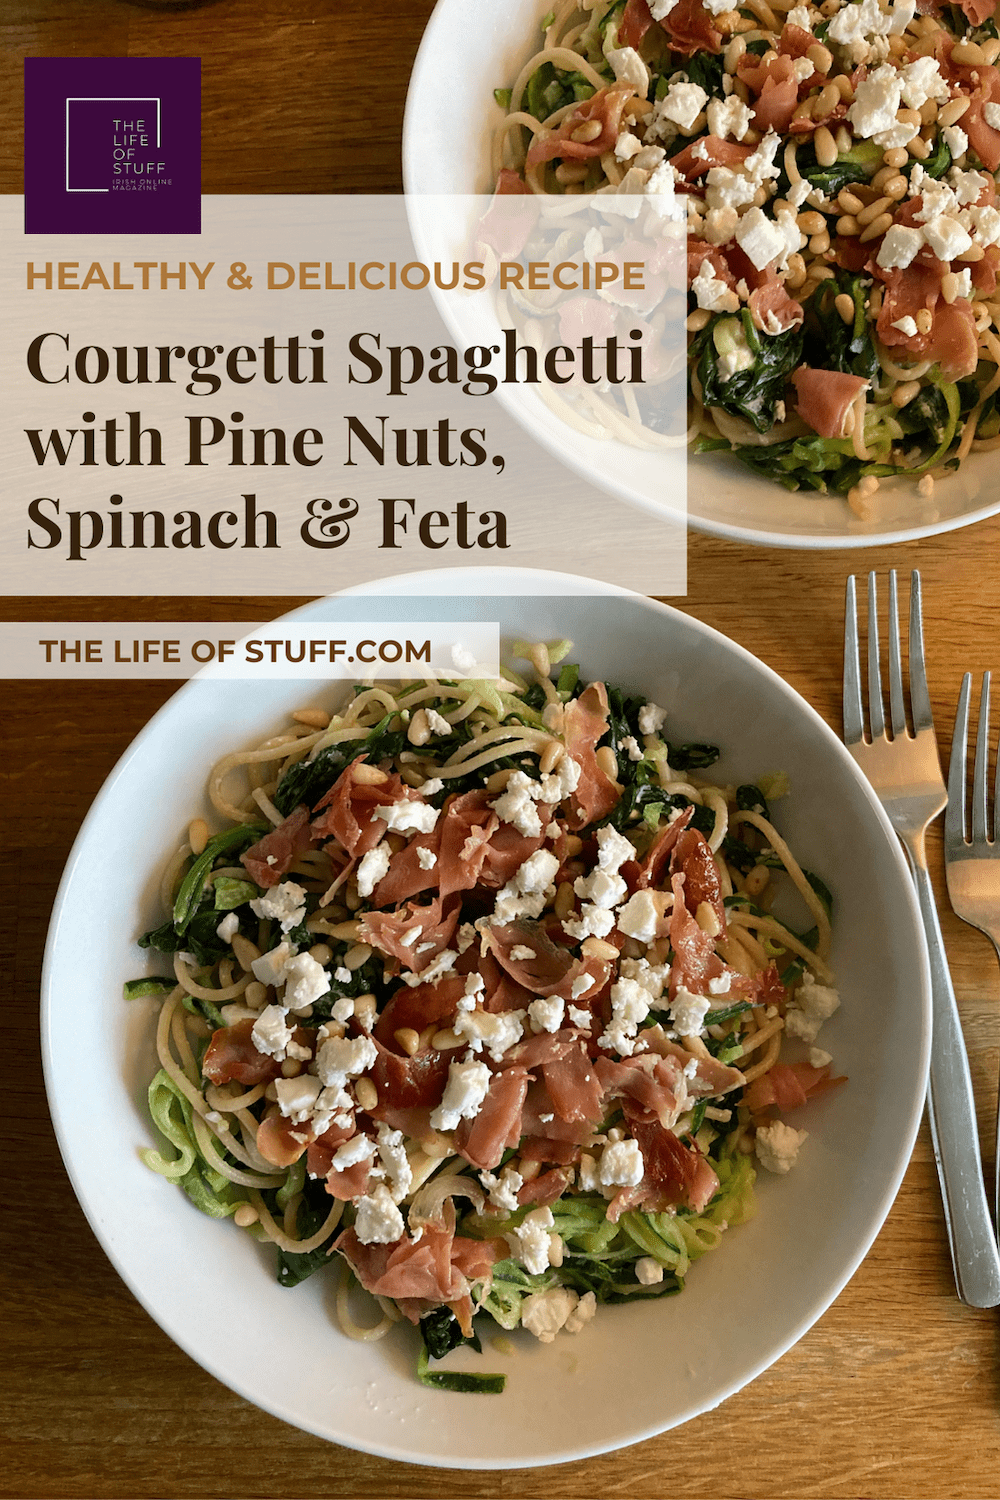 Courgetti Spaghetti with Pine Nuts, Spinach and Feta Recipe on The Life of Stuff